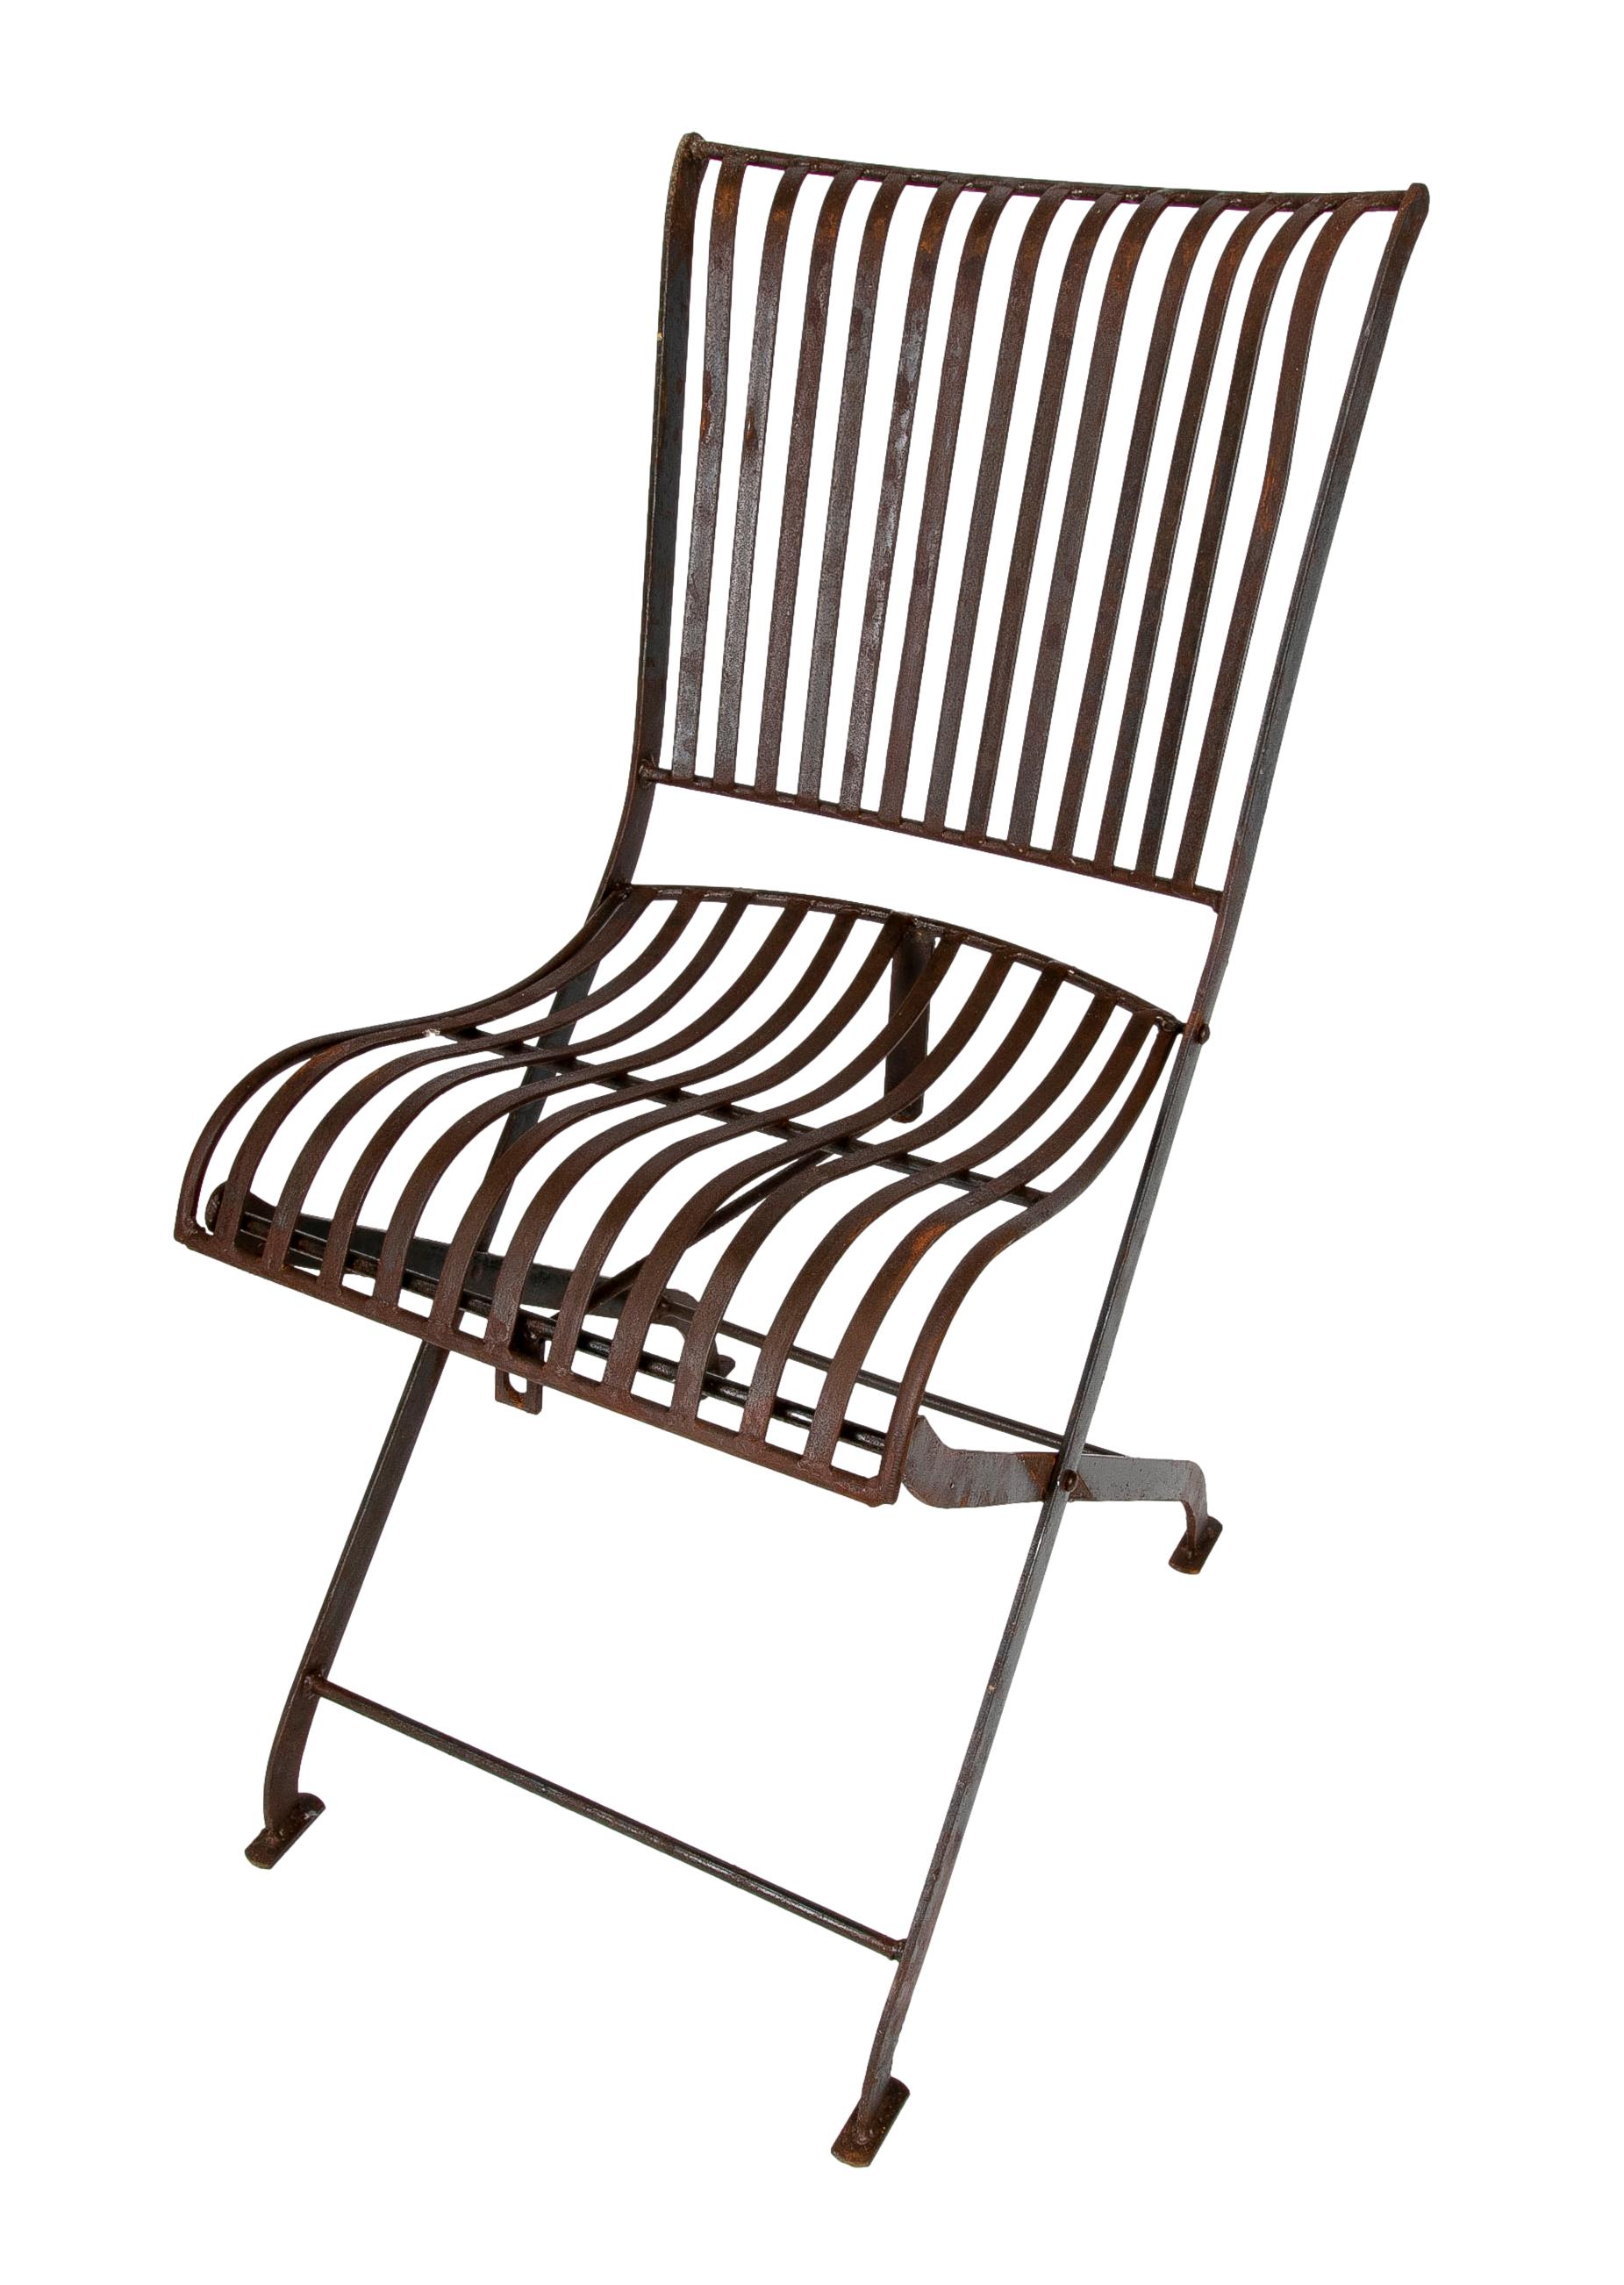 Contemporary Pair of Foldable Iron Garden Chairs For Sale